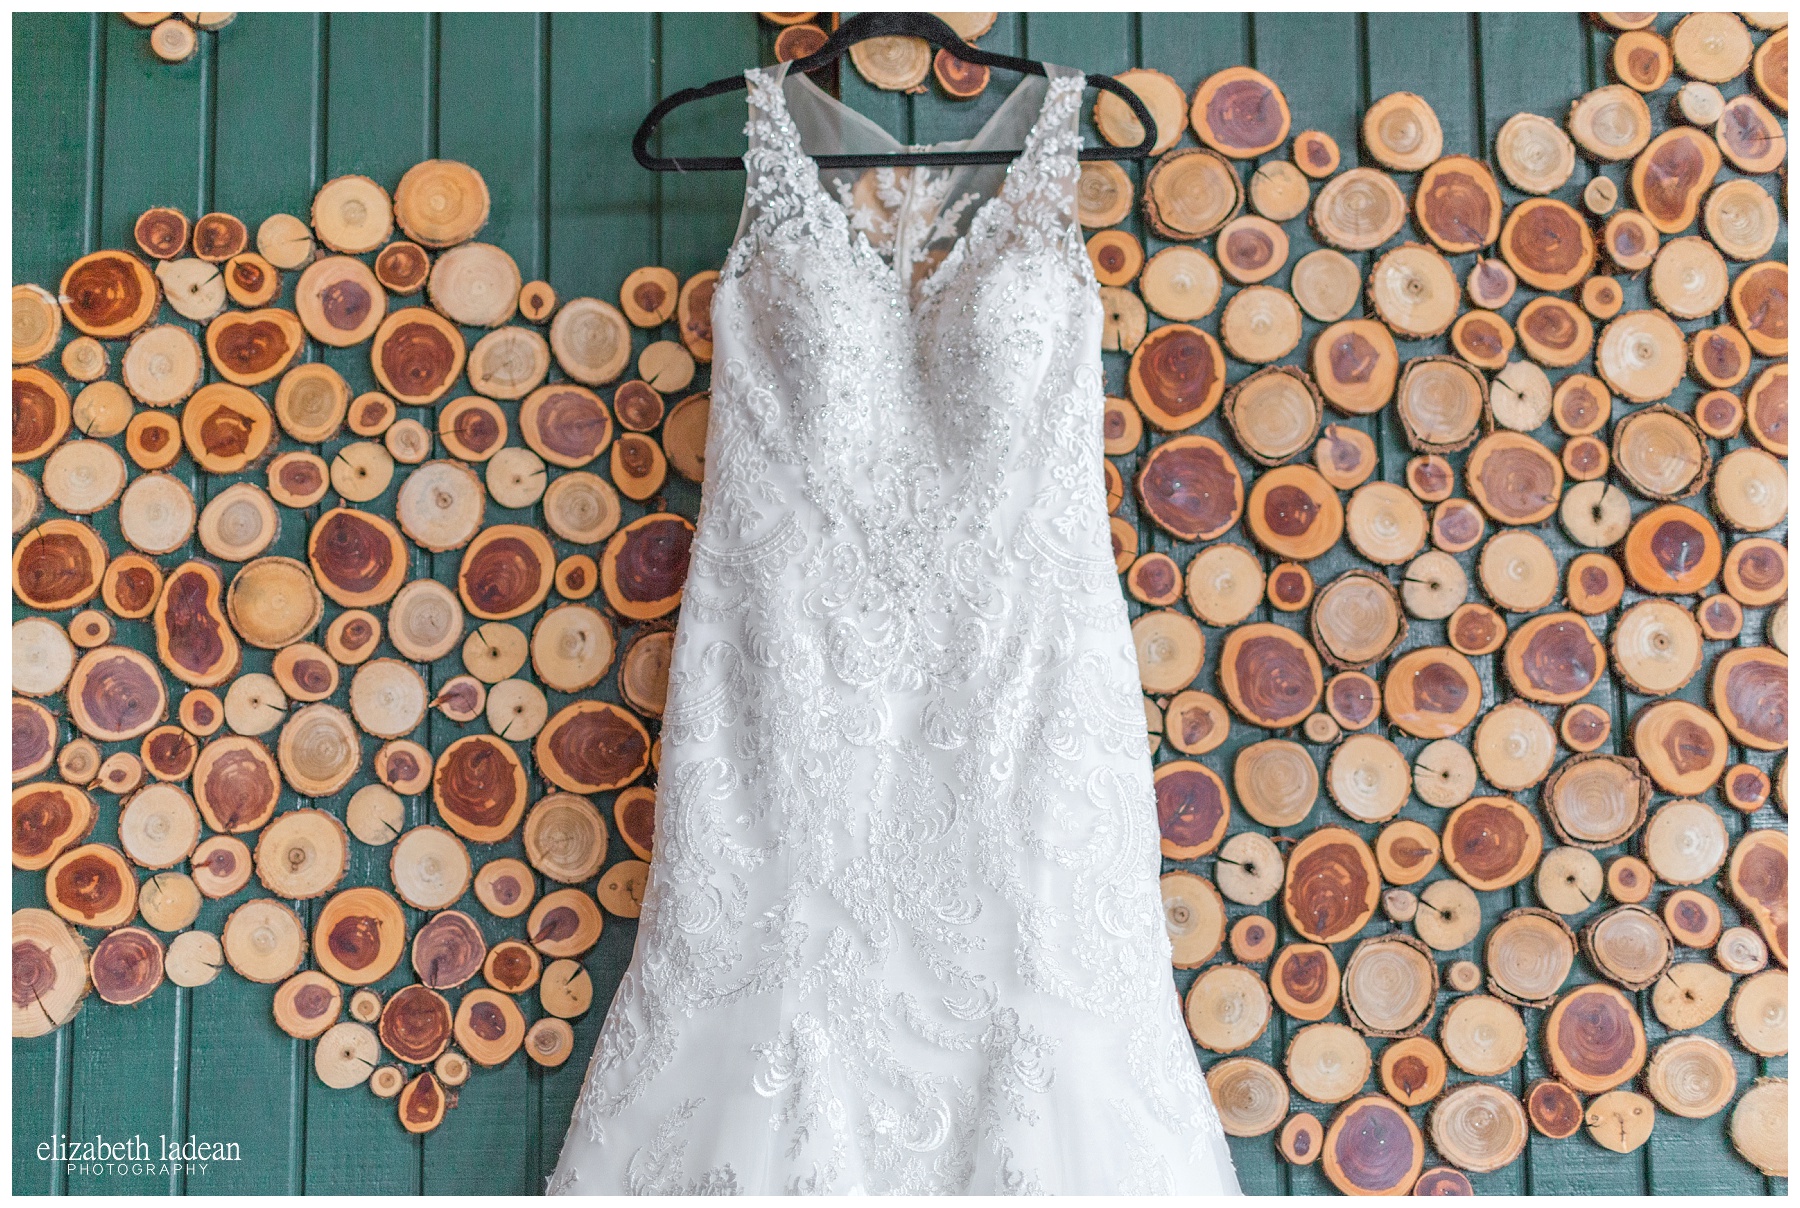 Bridal details at Abe and Jake's